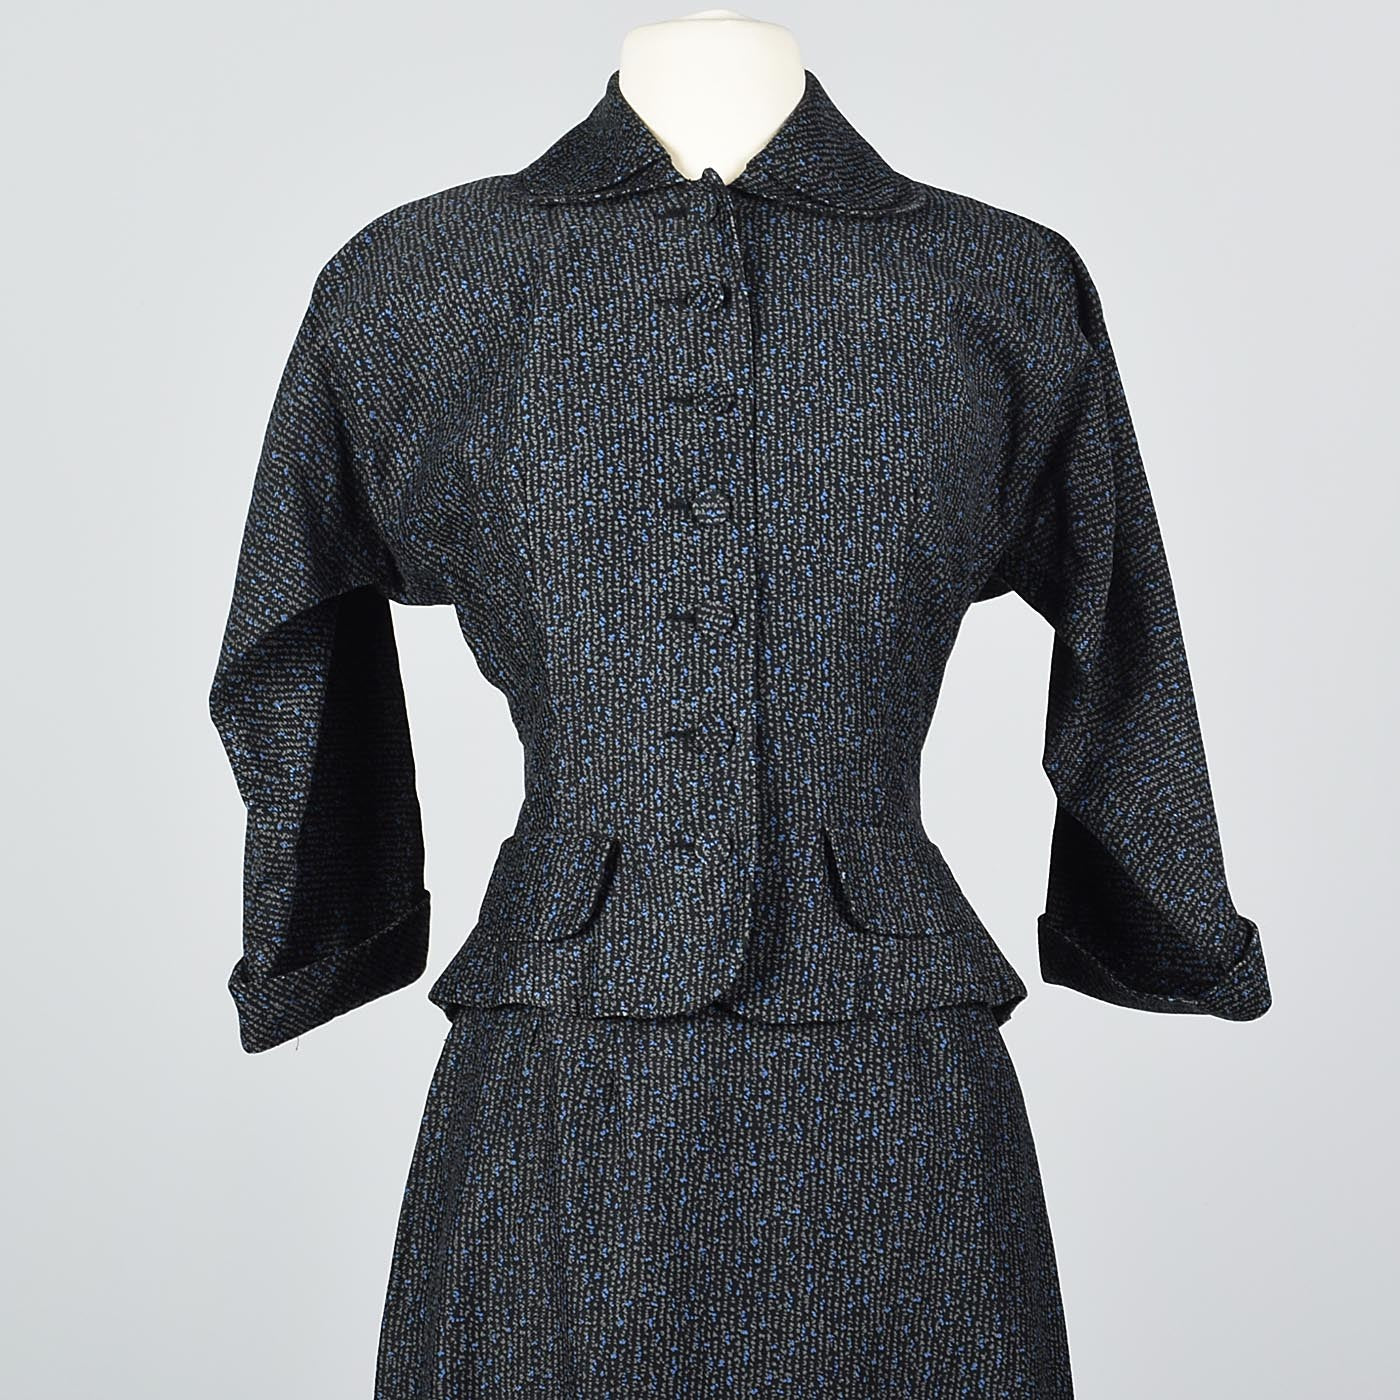 1950s Skirt Suit with Blue and Black Pattern